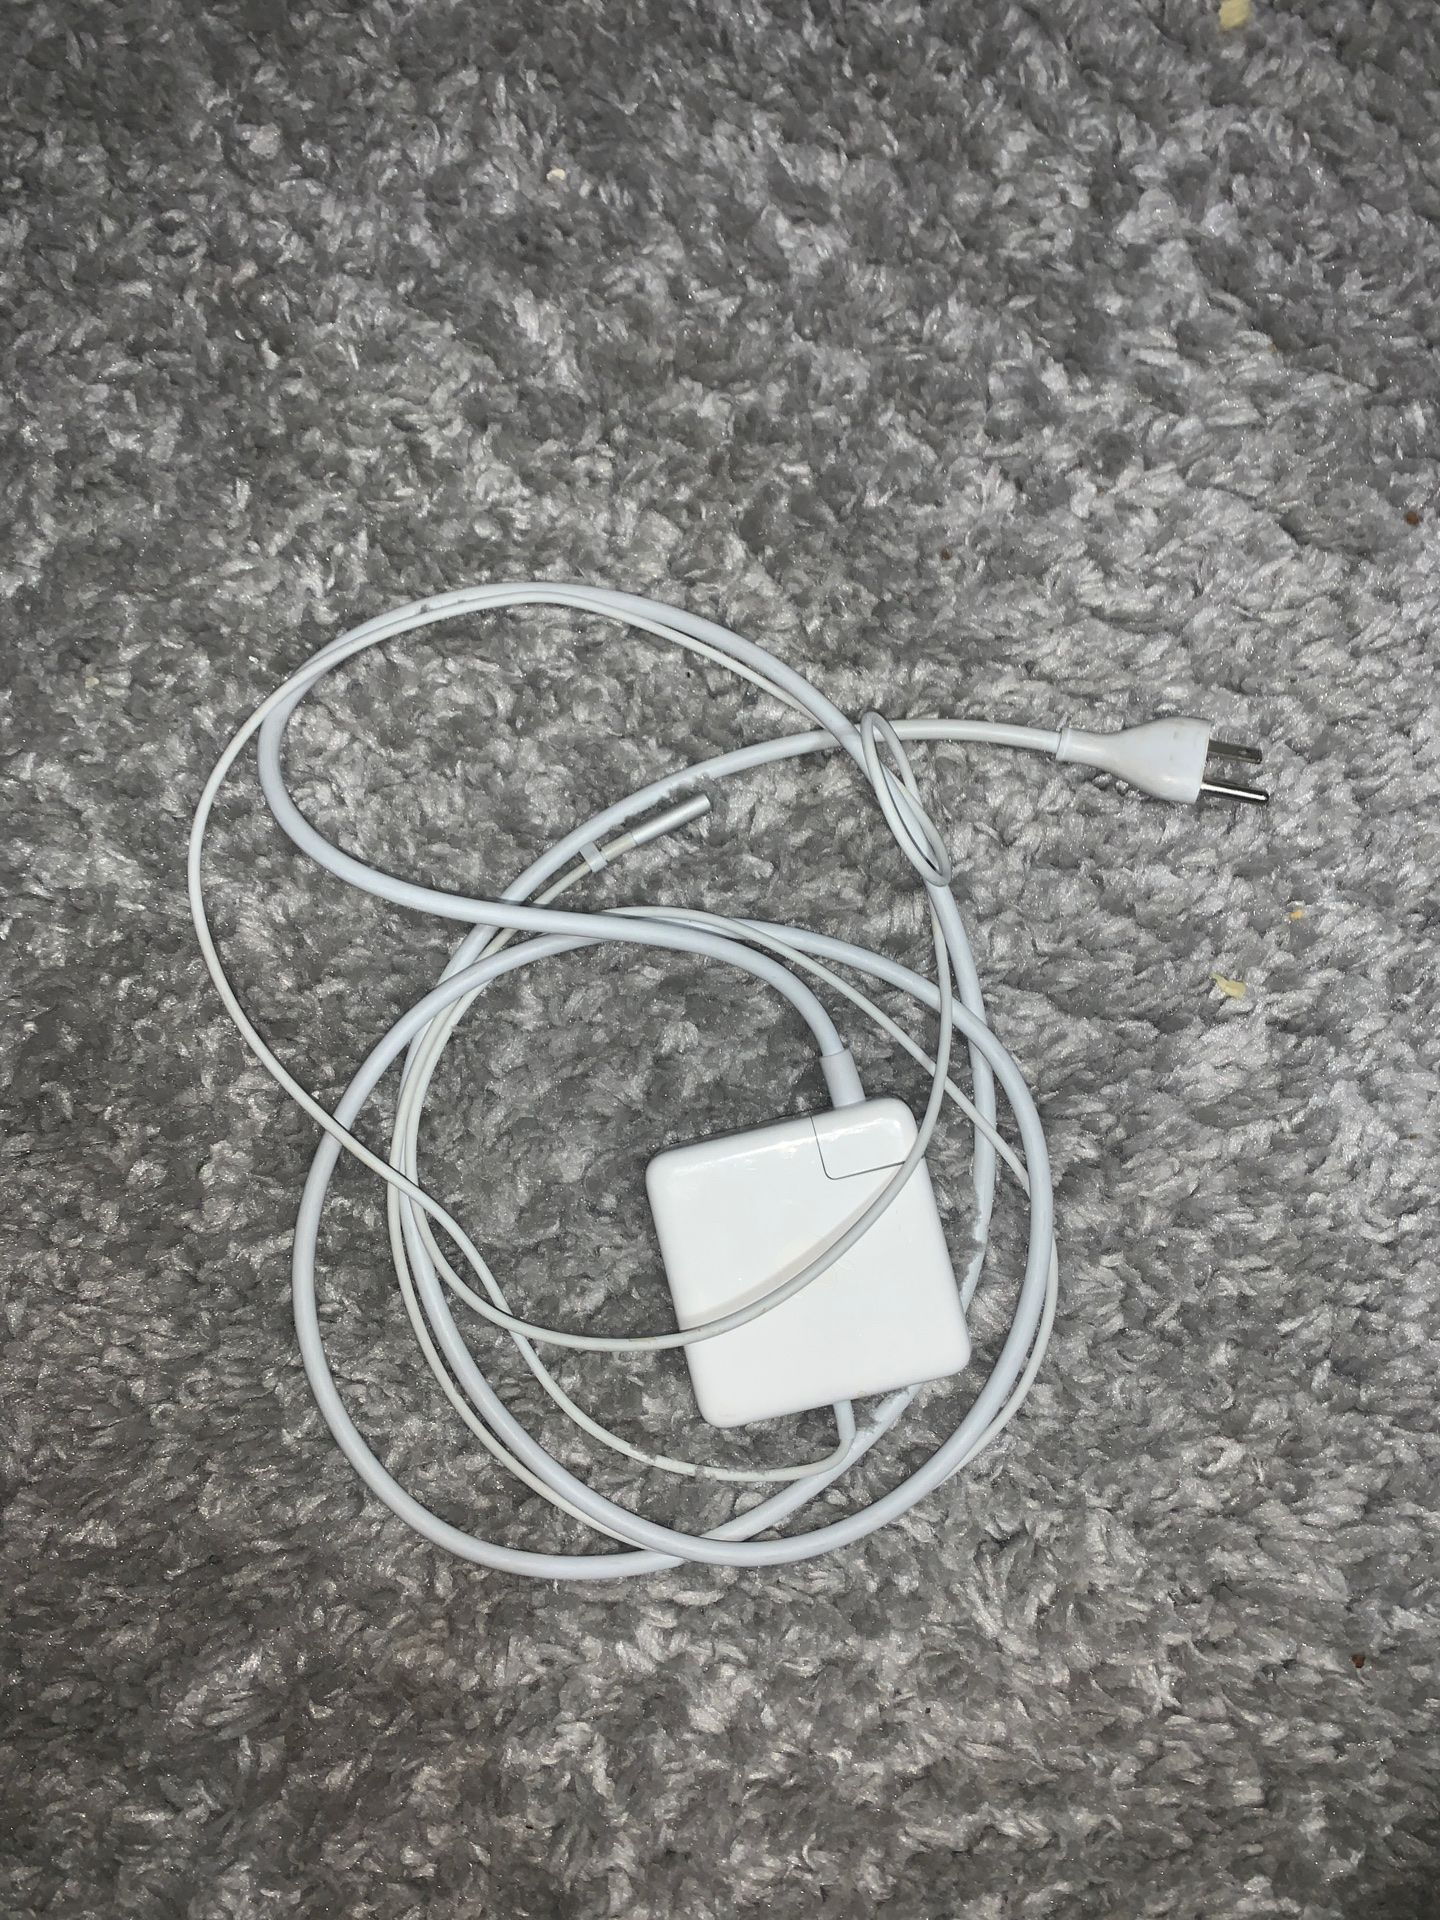 Old MacBook Charger